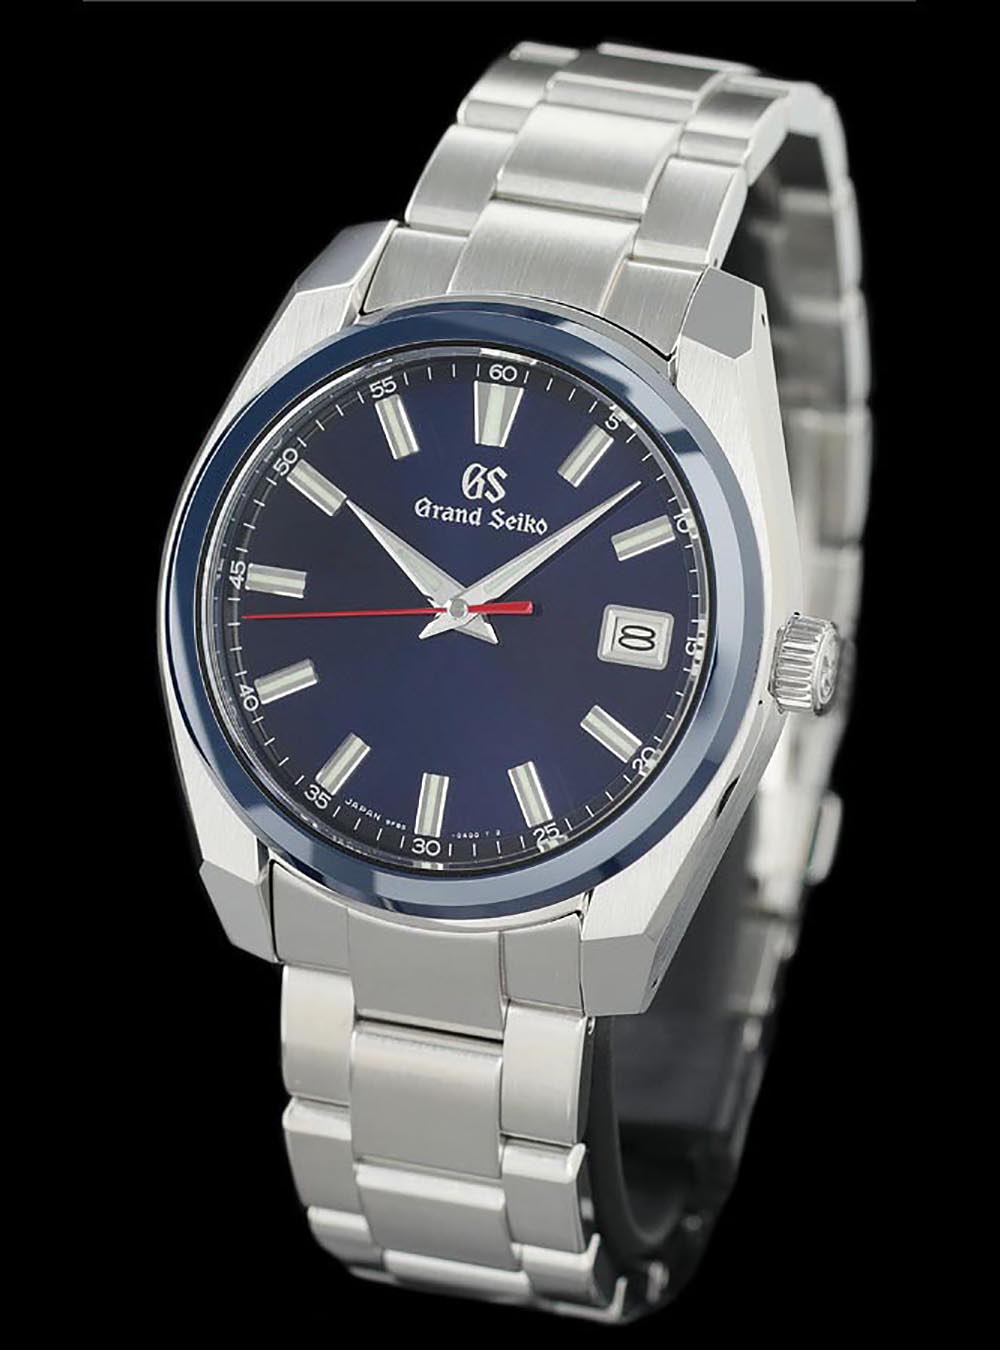 GRAND SEIKO 60TH ANNIVERSARY SBGP015 LIMITED EDITION OF 2,000 PCS MADE IN JAPAN JDMjapan-select4954628454584WRISTWATCHGRAND SEIKO